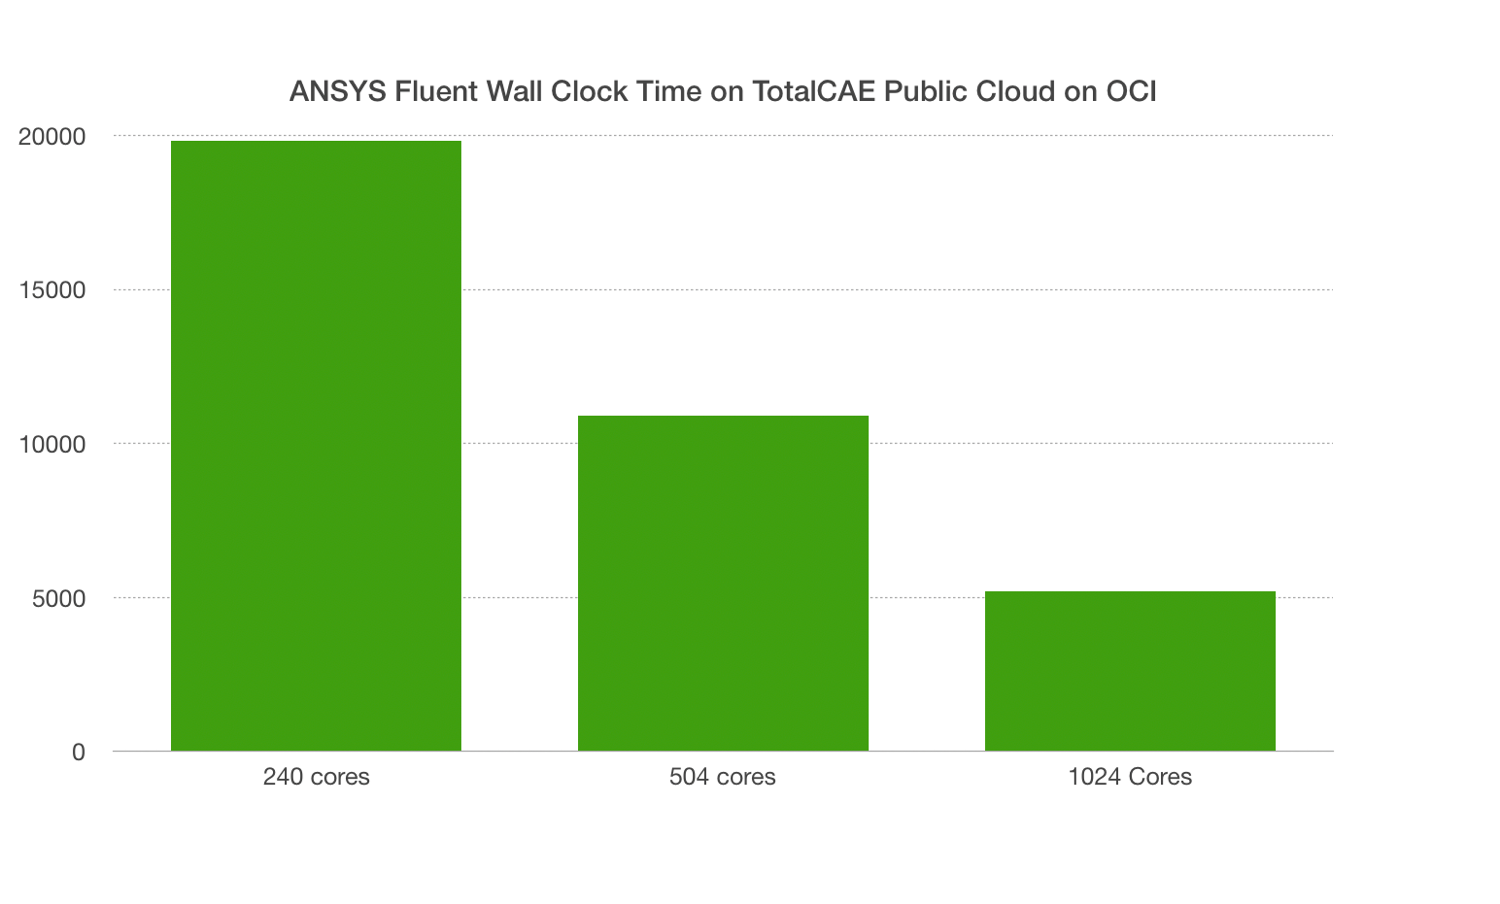 ANSYS Fluent Scaling with TotalCAE Cloud on OCI